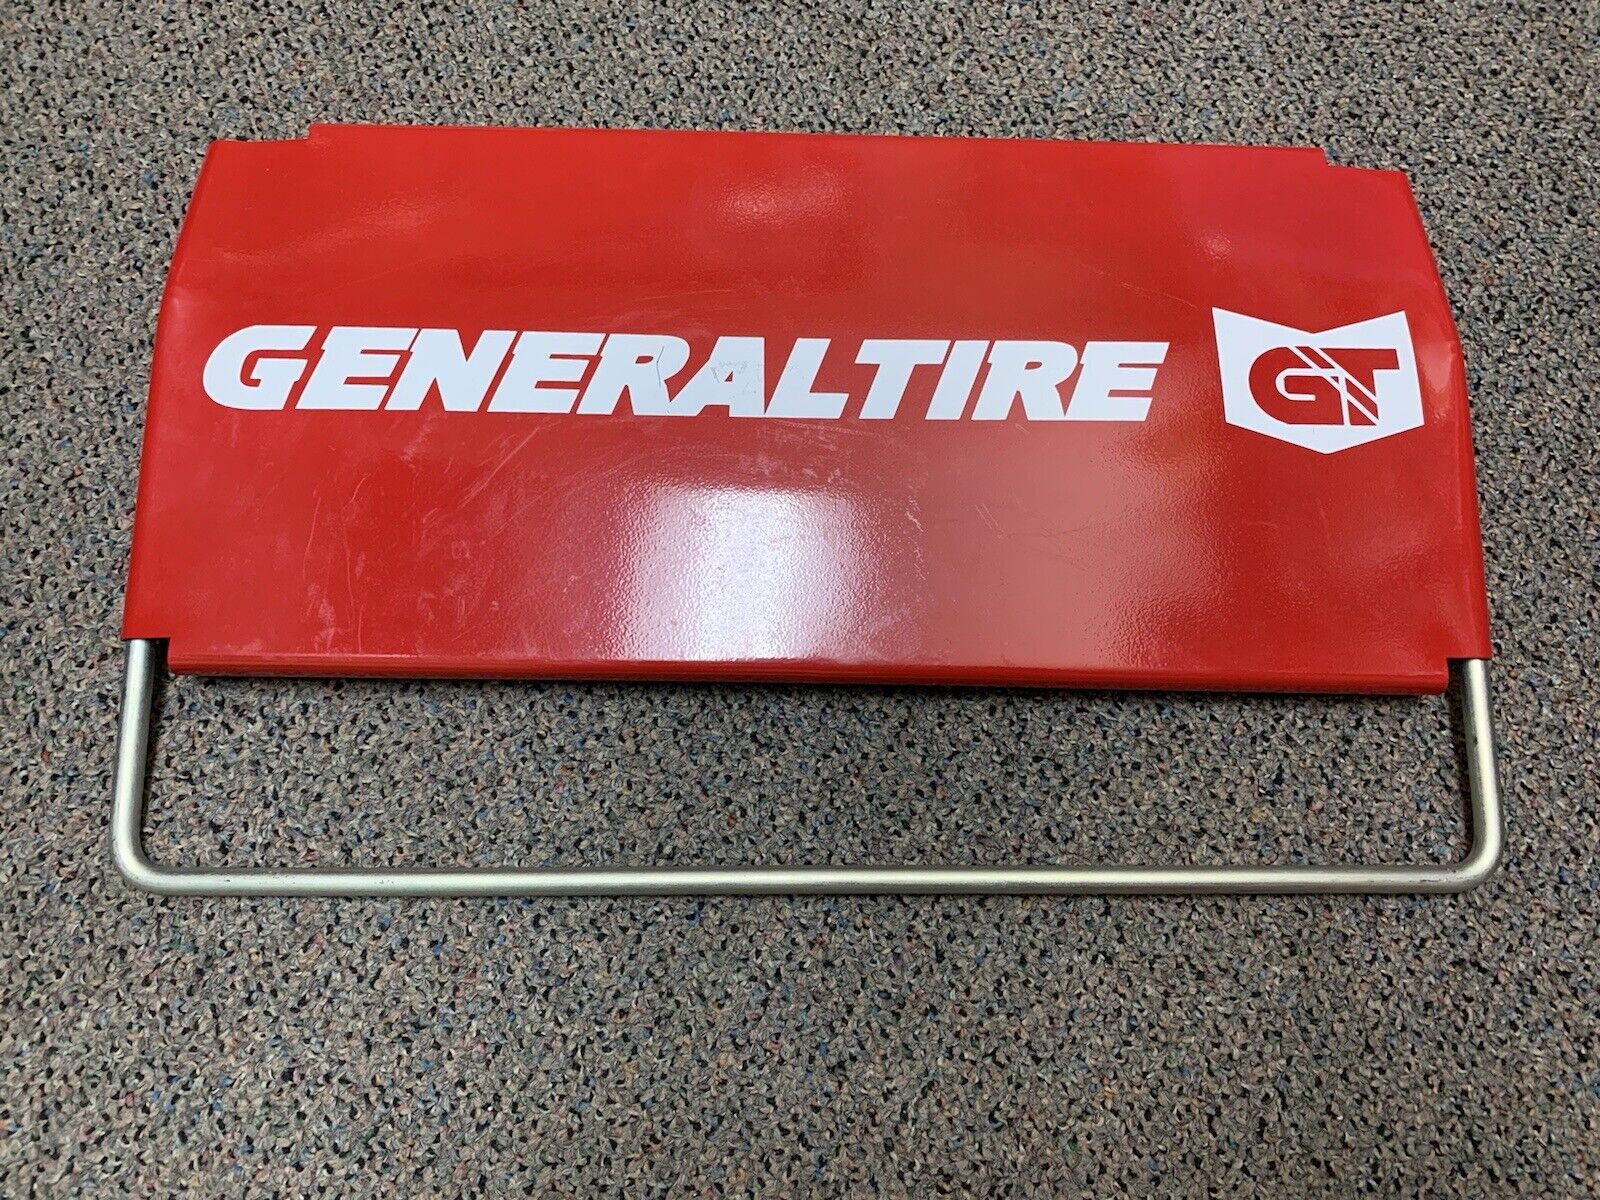 🔥VINTAGE GENERAL TIRE METAL SIGN 12” X19” MAN CAVE GARAGE MADE IN USA🔥